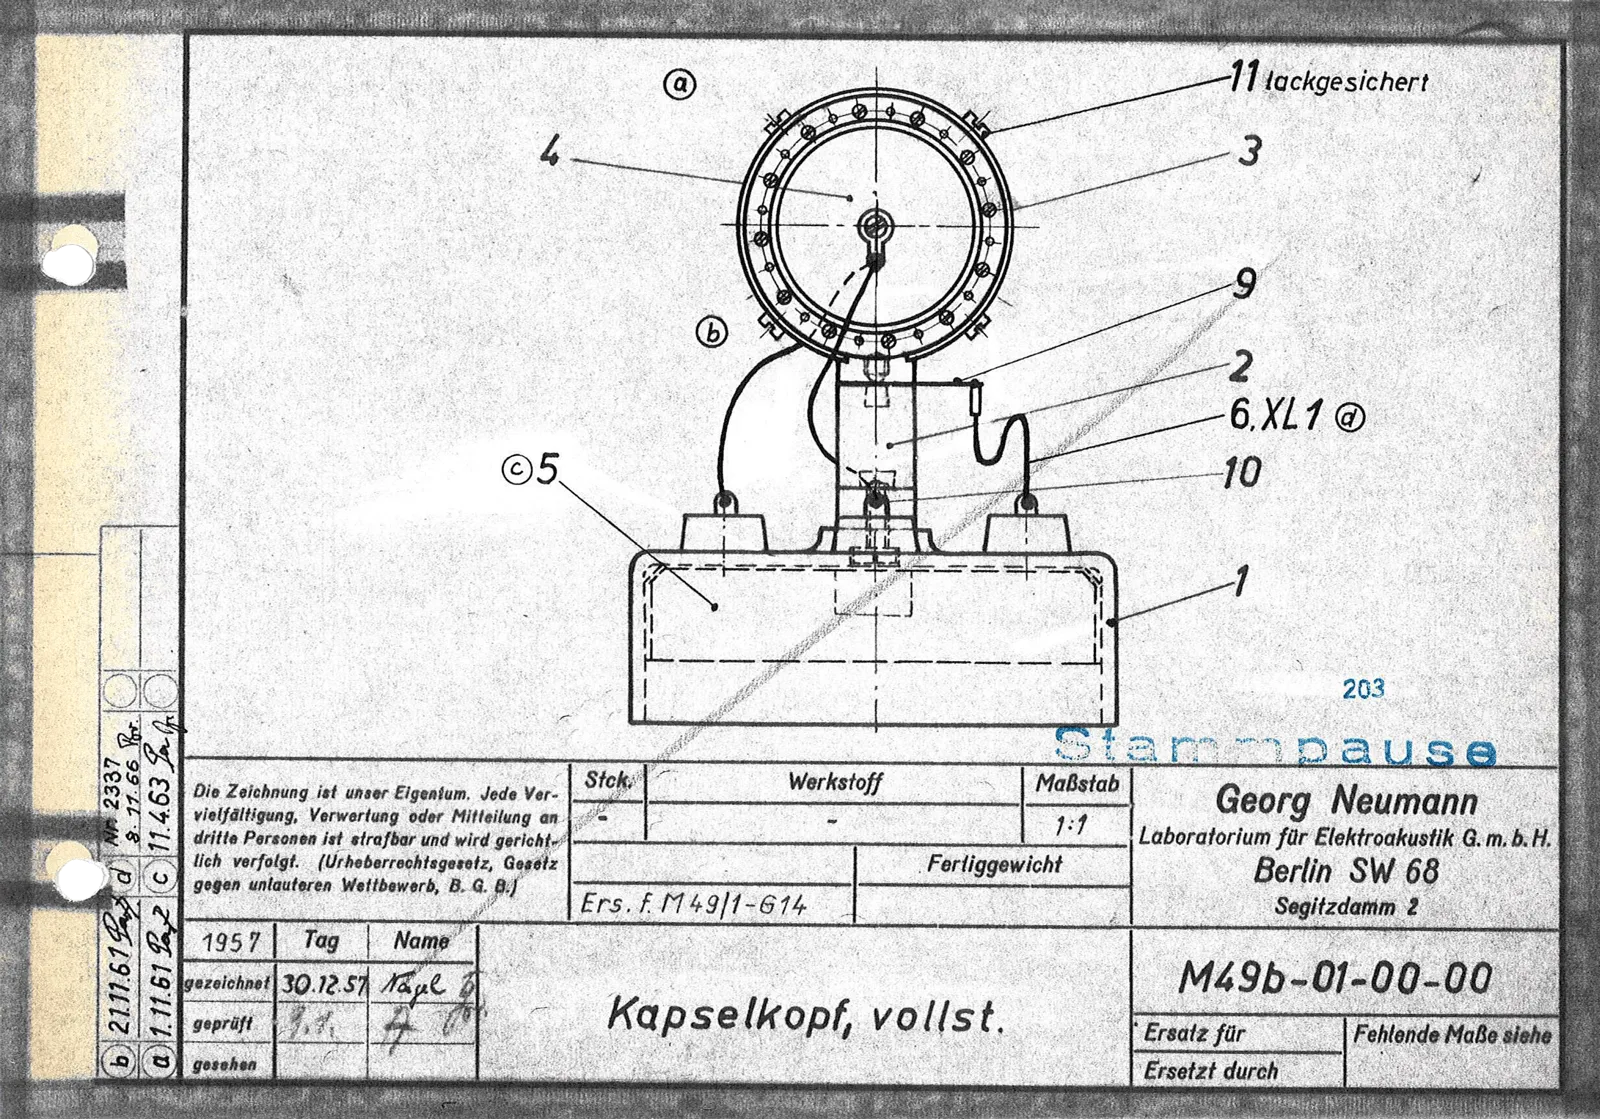 Technical drawing of the microphone capsule